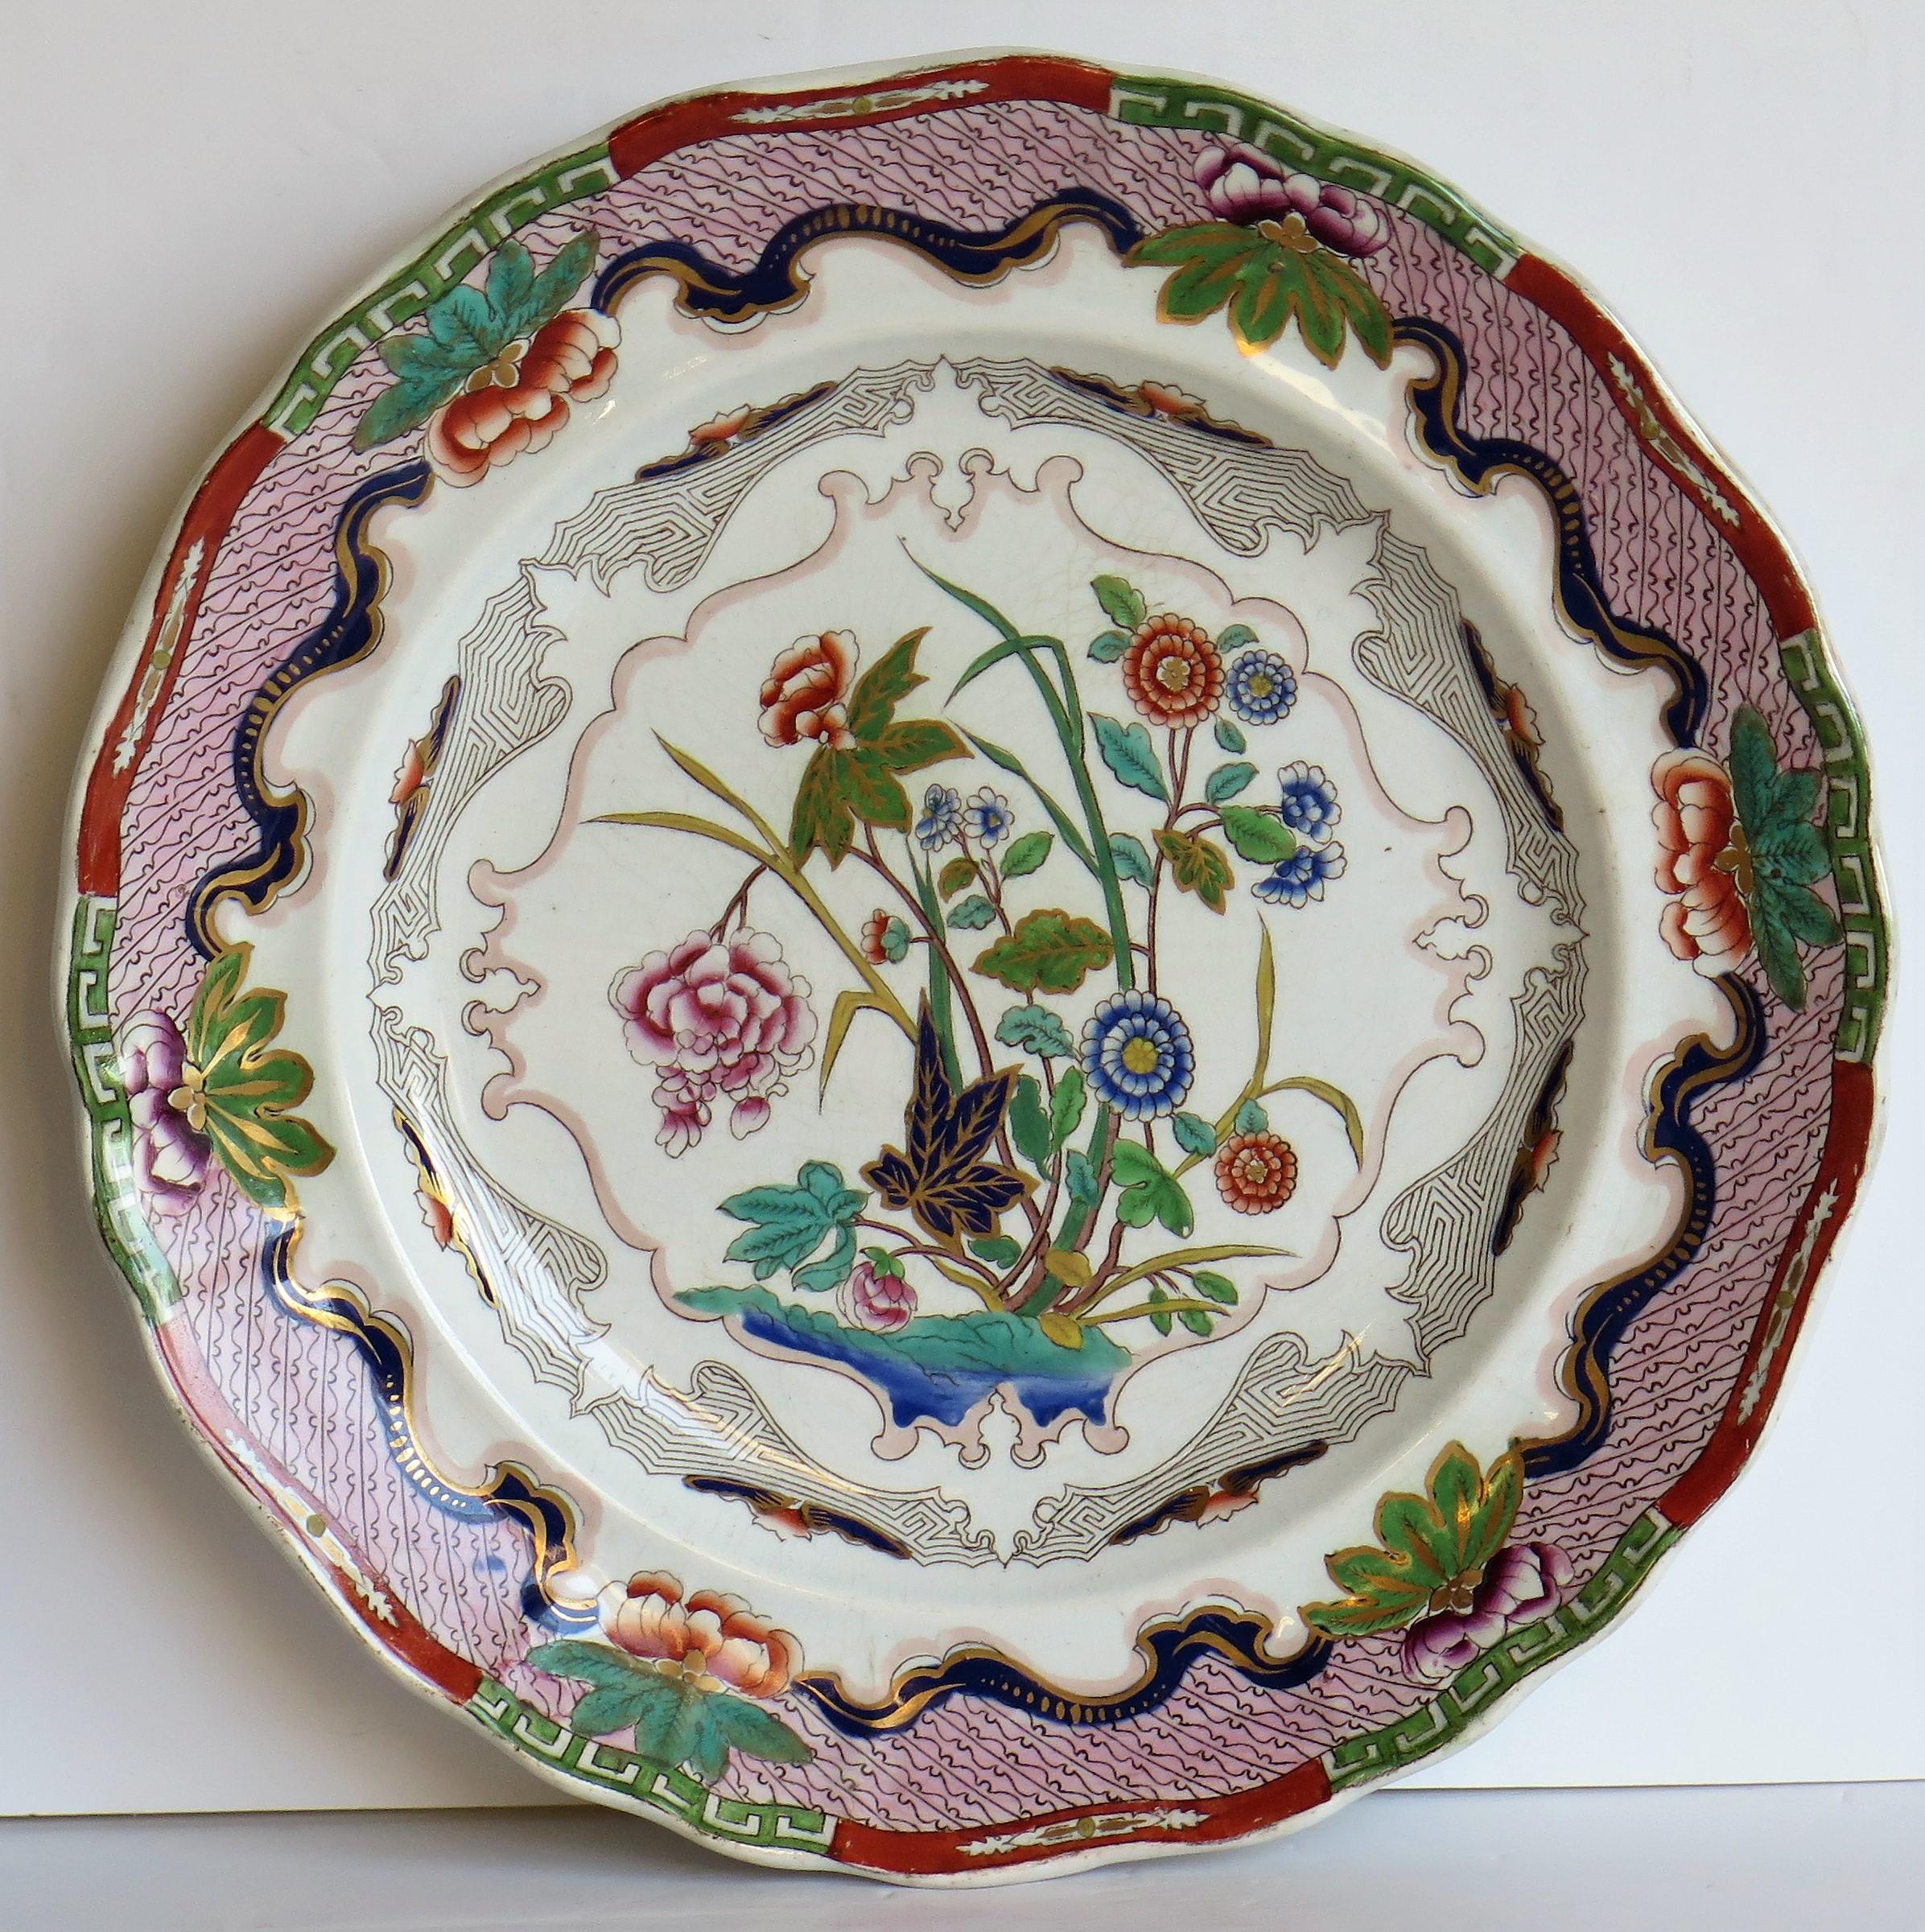 19th Century Charles Meigh Ironstone Plate Hand Painted Floral Pattern No. 422, circa 1840